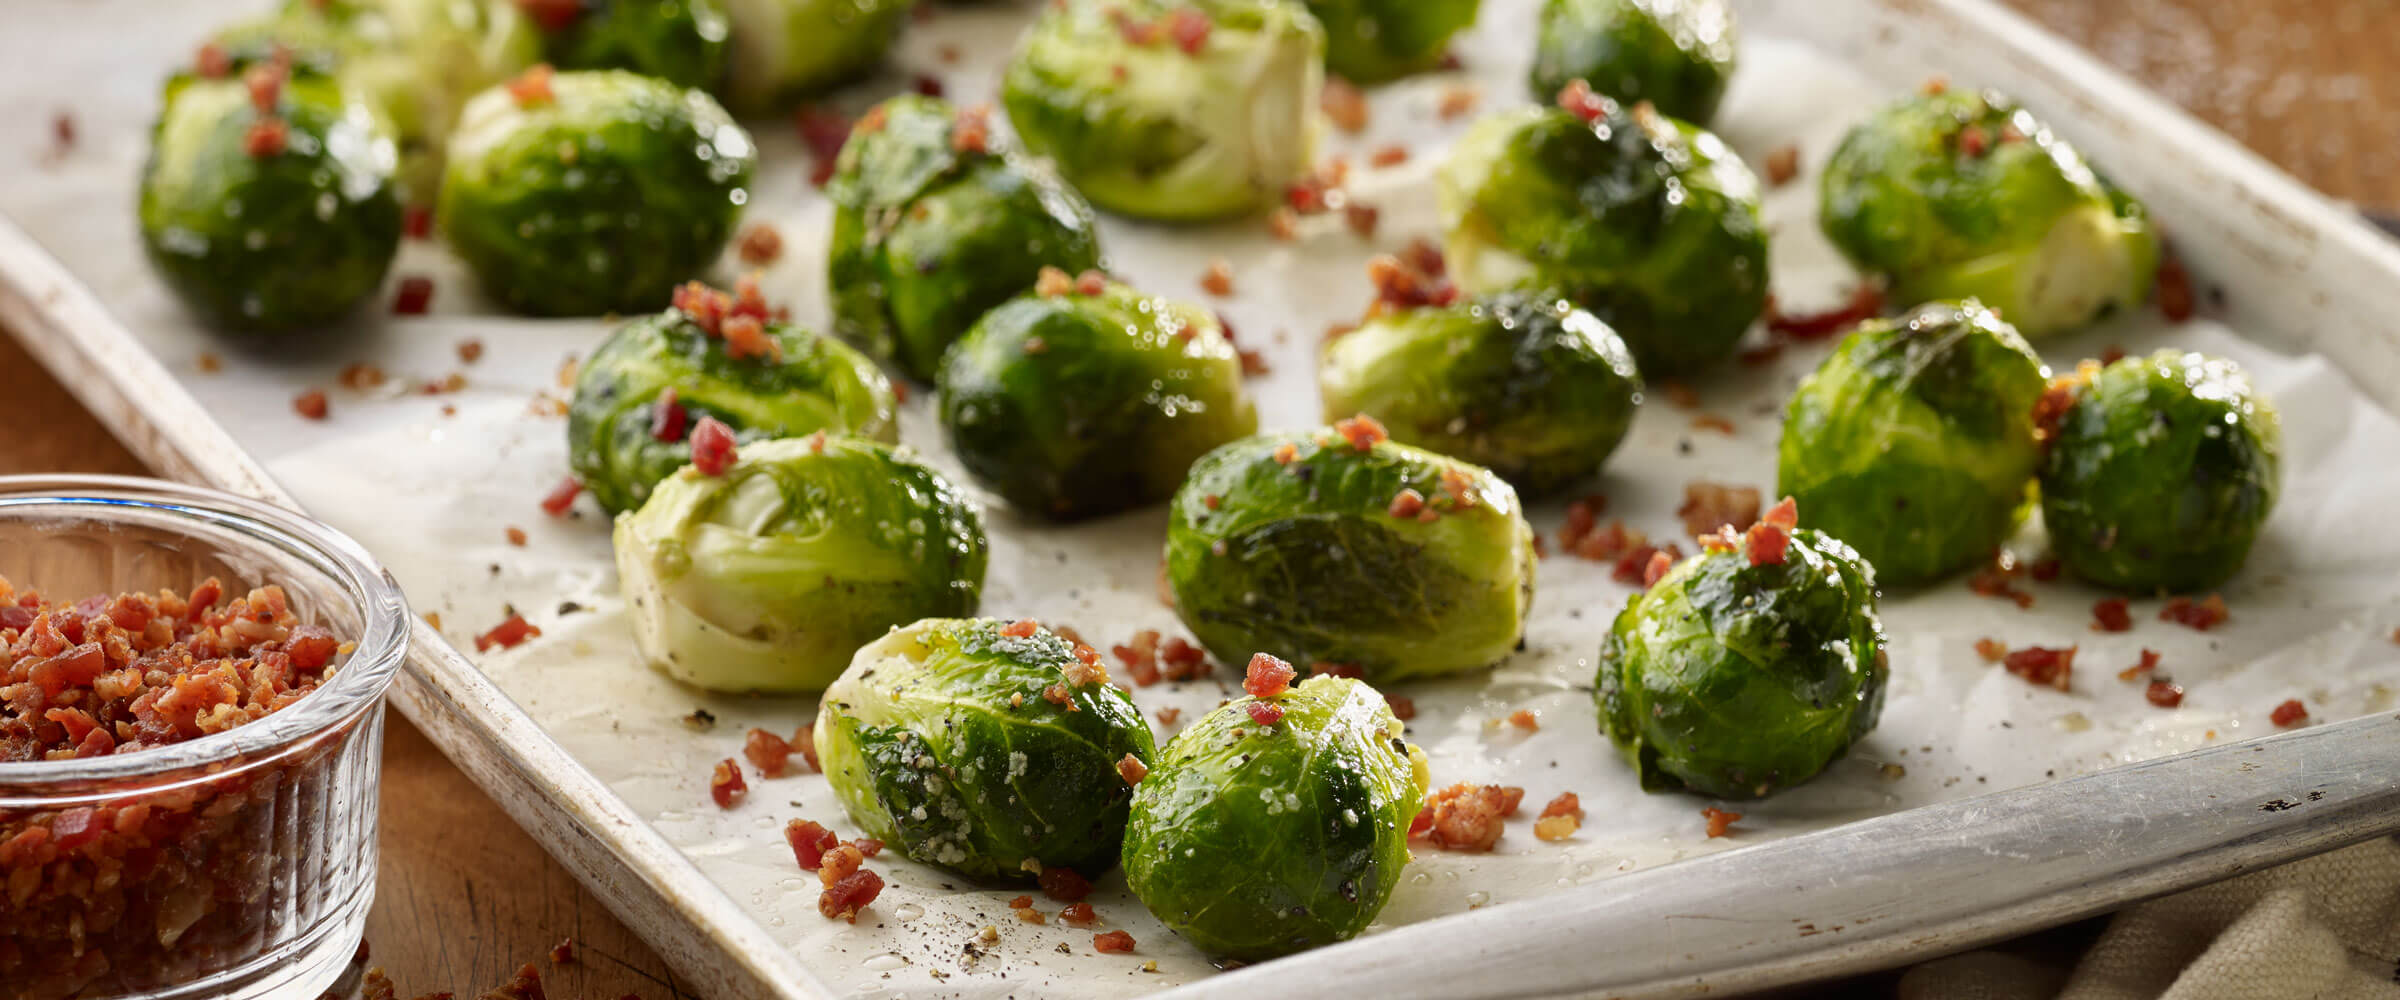 Brussels Sprouts with bacon on sheet pan